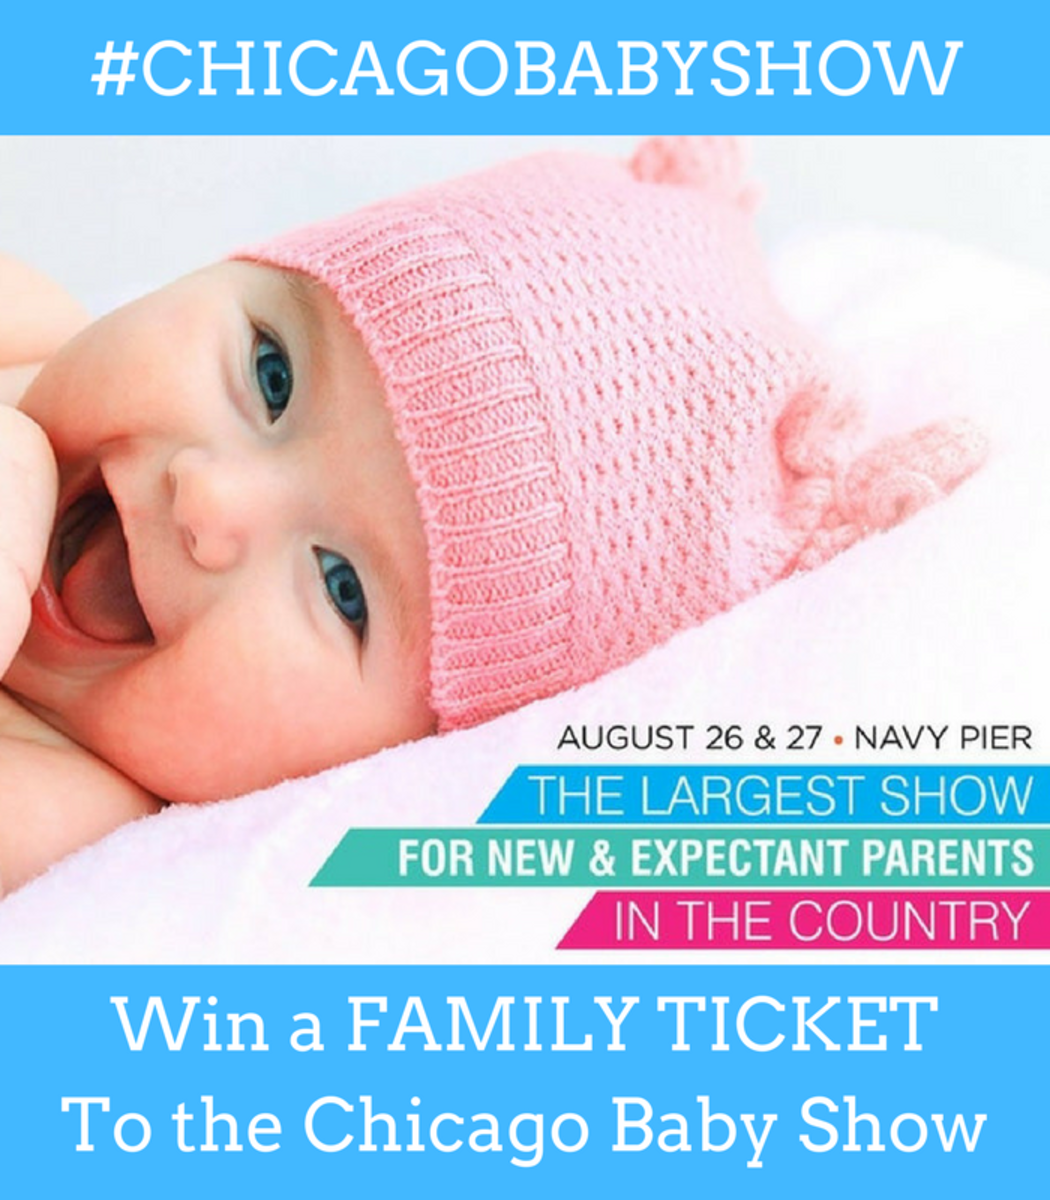 Win a FAMILY TICKETTo the Chicago Baby Show